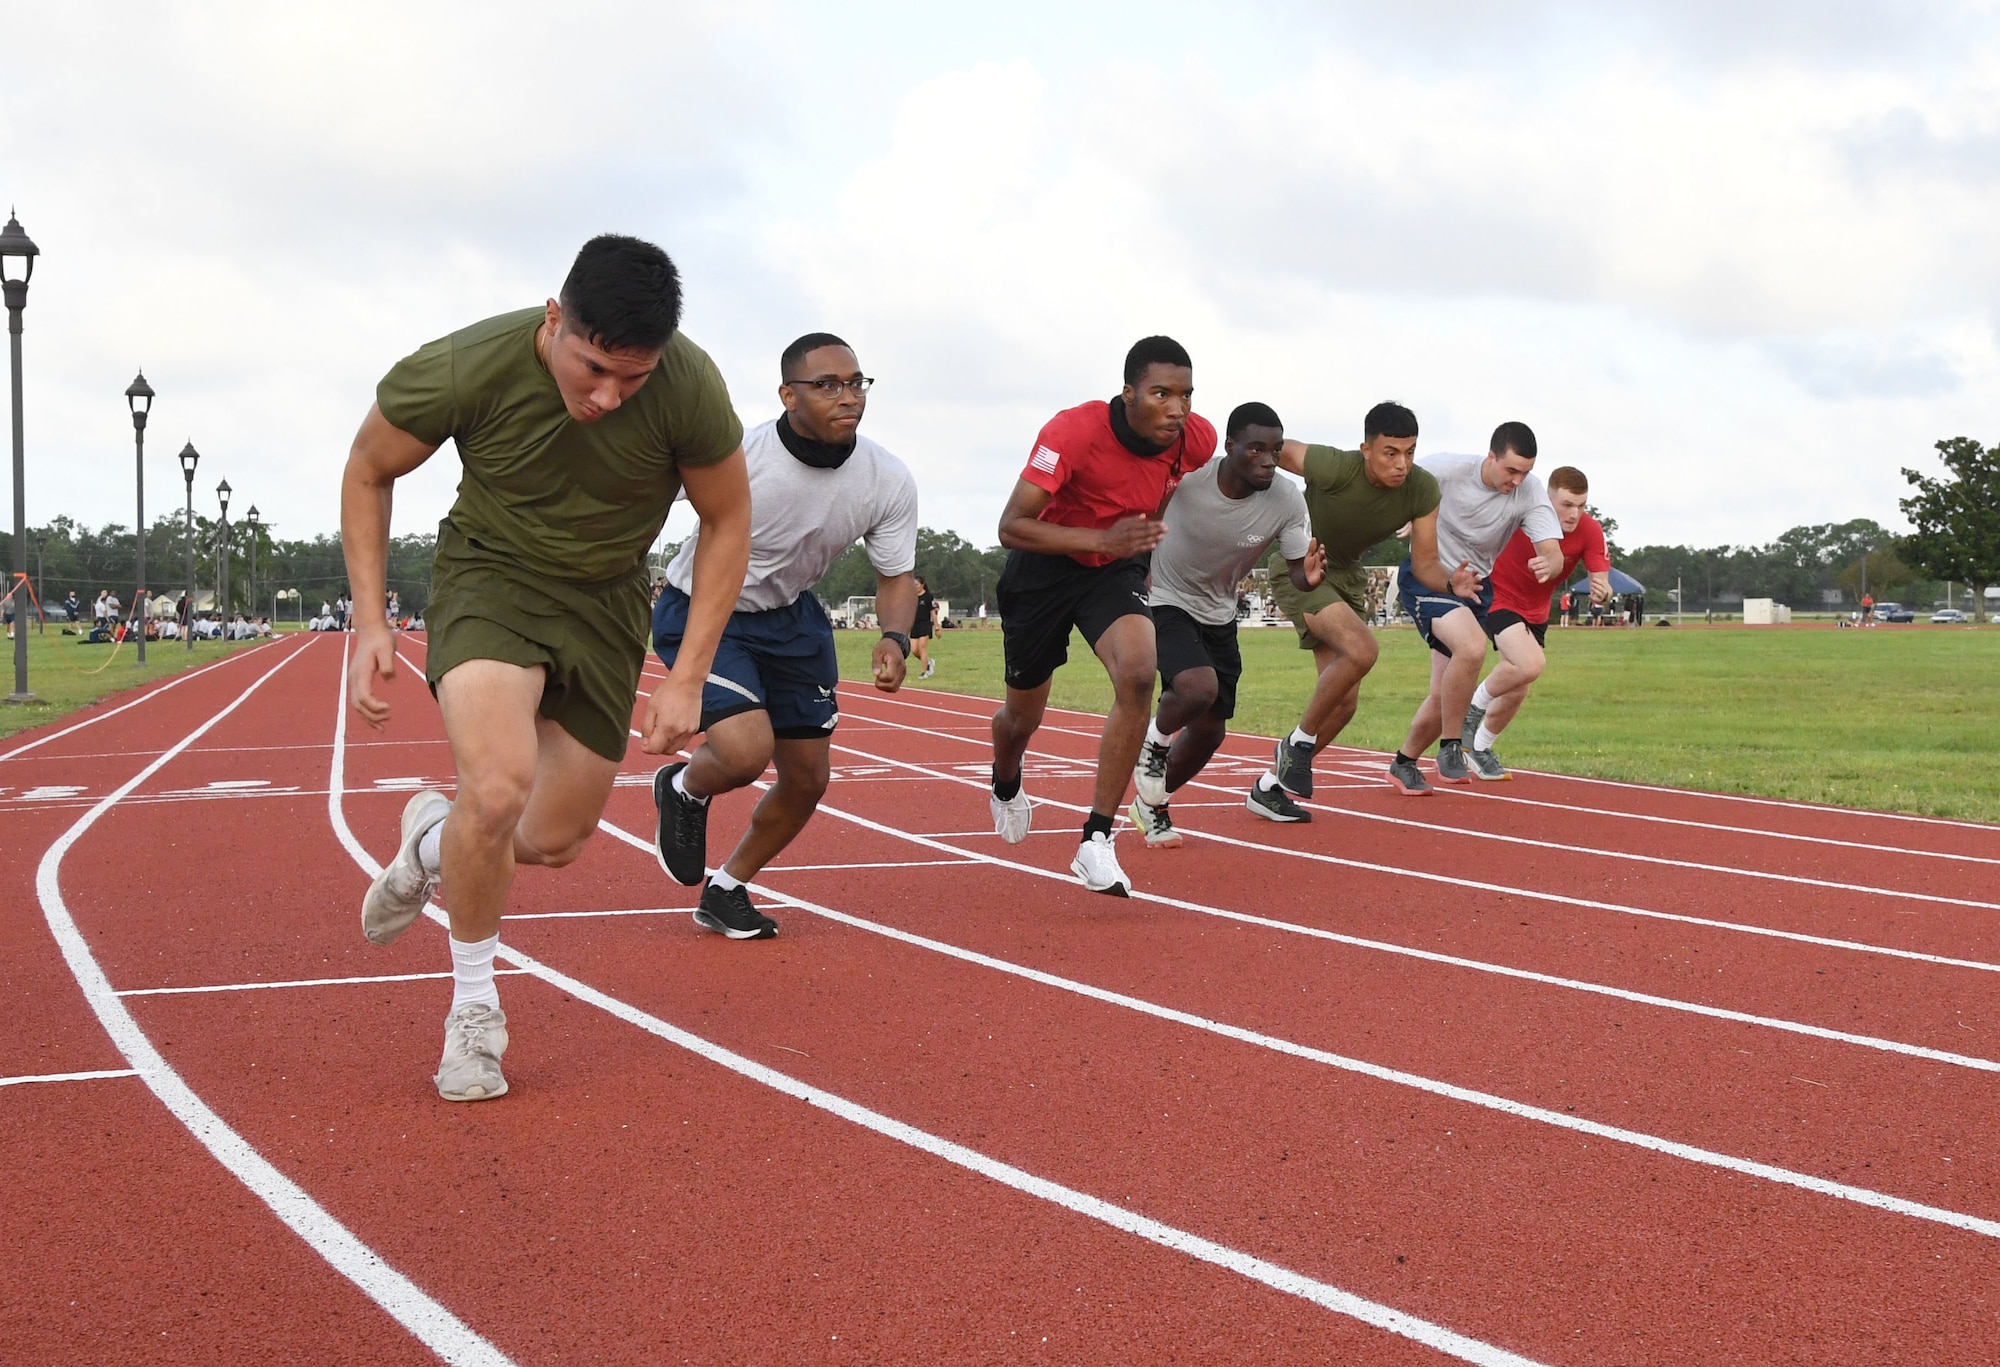 U.S. Airmen and Marines in the 81st Training Group participates in the 200 meter run during the 81st Training Group Olympics at Keesler Air Force Base, Mississippi, June 11, 2021. The event also included competitions in weight lifting, long jump, shot put and discus. (U.S. Air Force photo by Kemberly Groue)